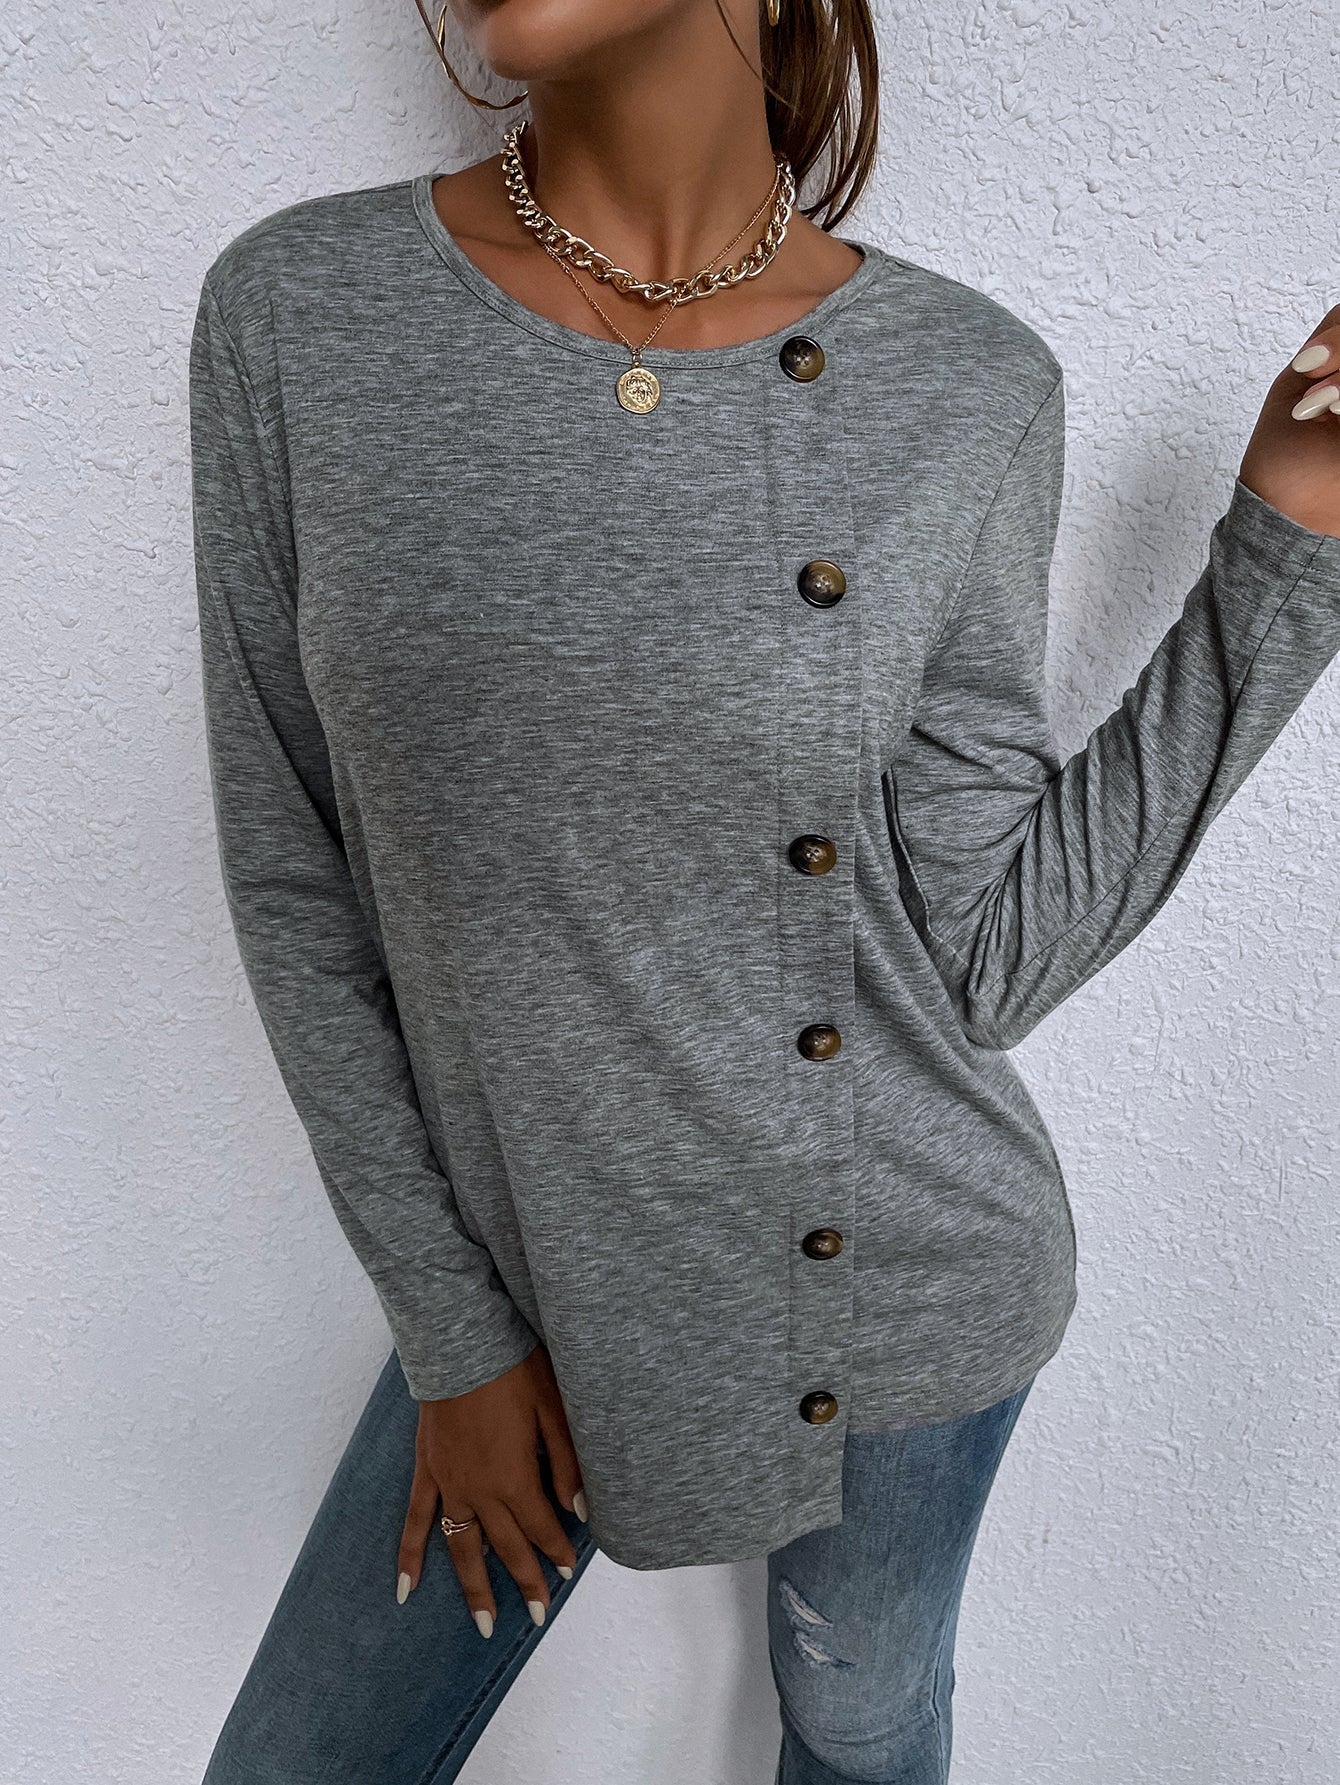 Round neck long-sleeved single-breasted casual home loose t-shirt Sai Feel